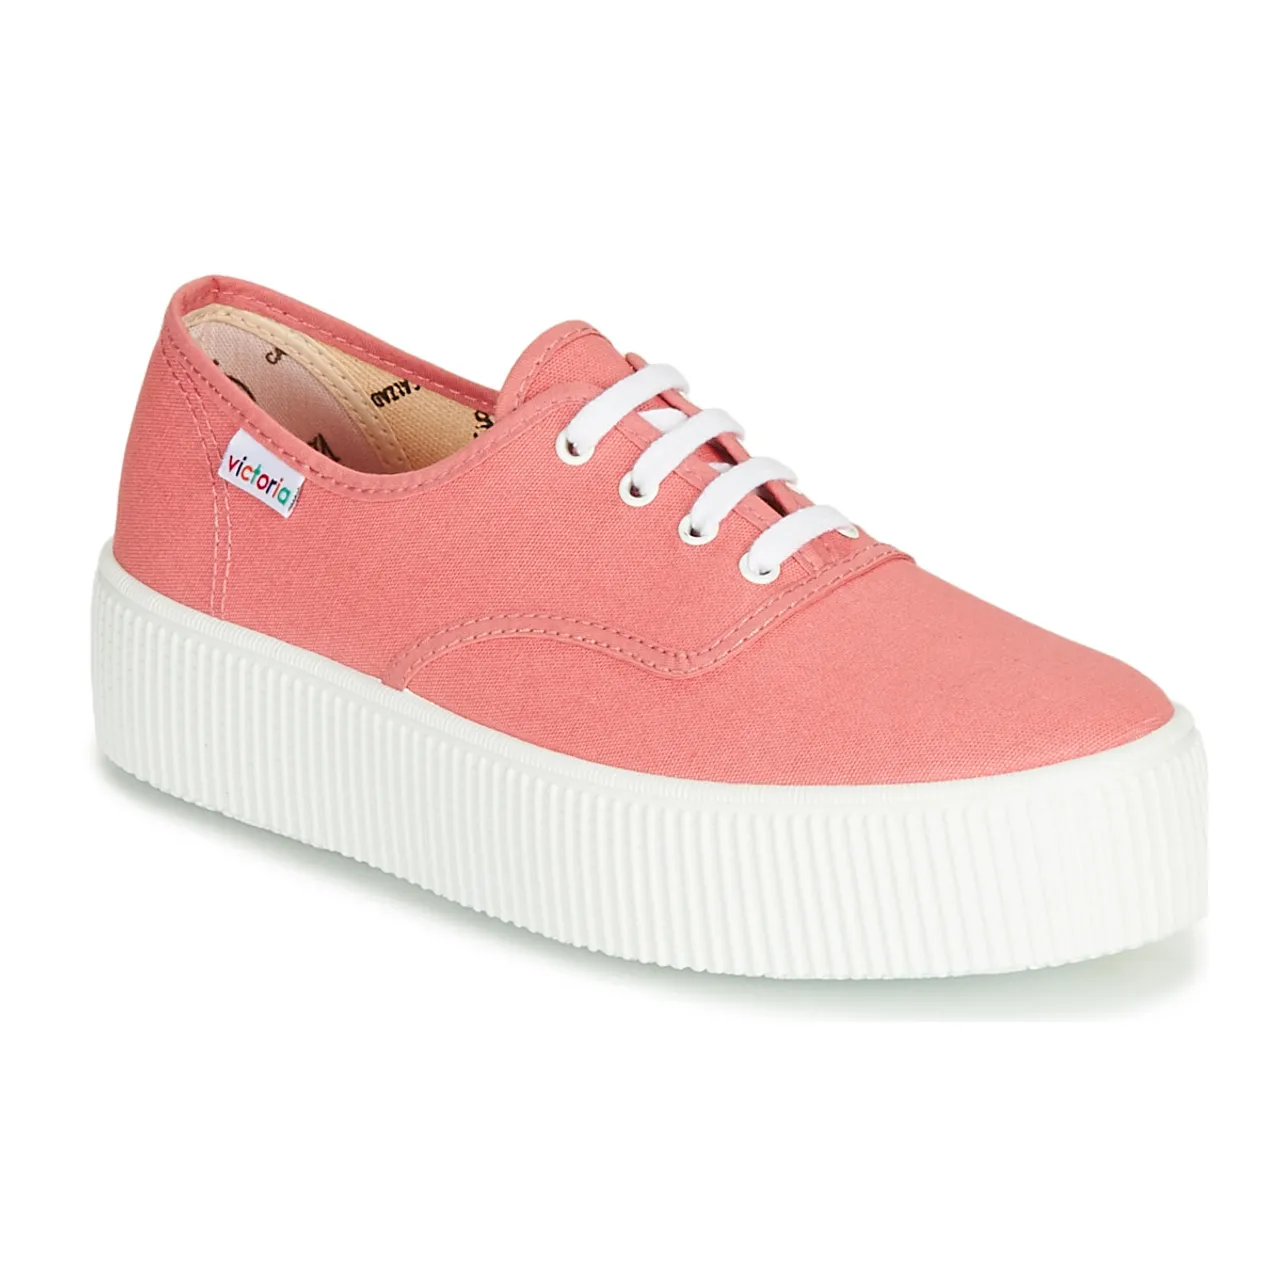 Victoria  1915 DOBLE LONA  women's Shoes (Trainers) in Pink